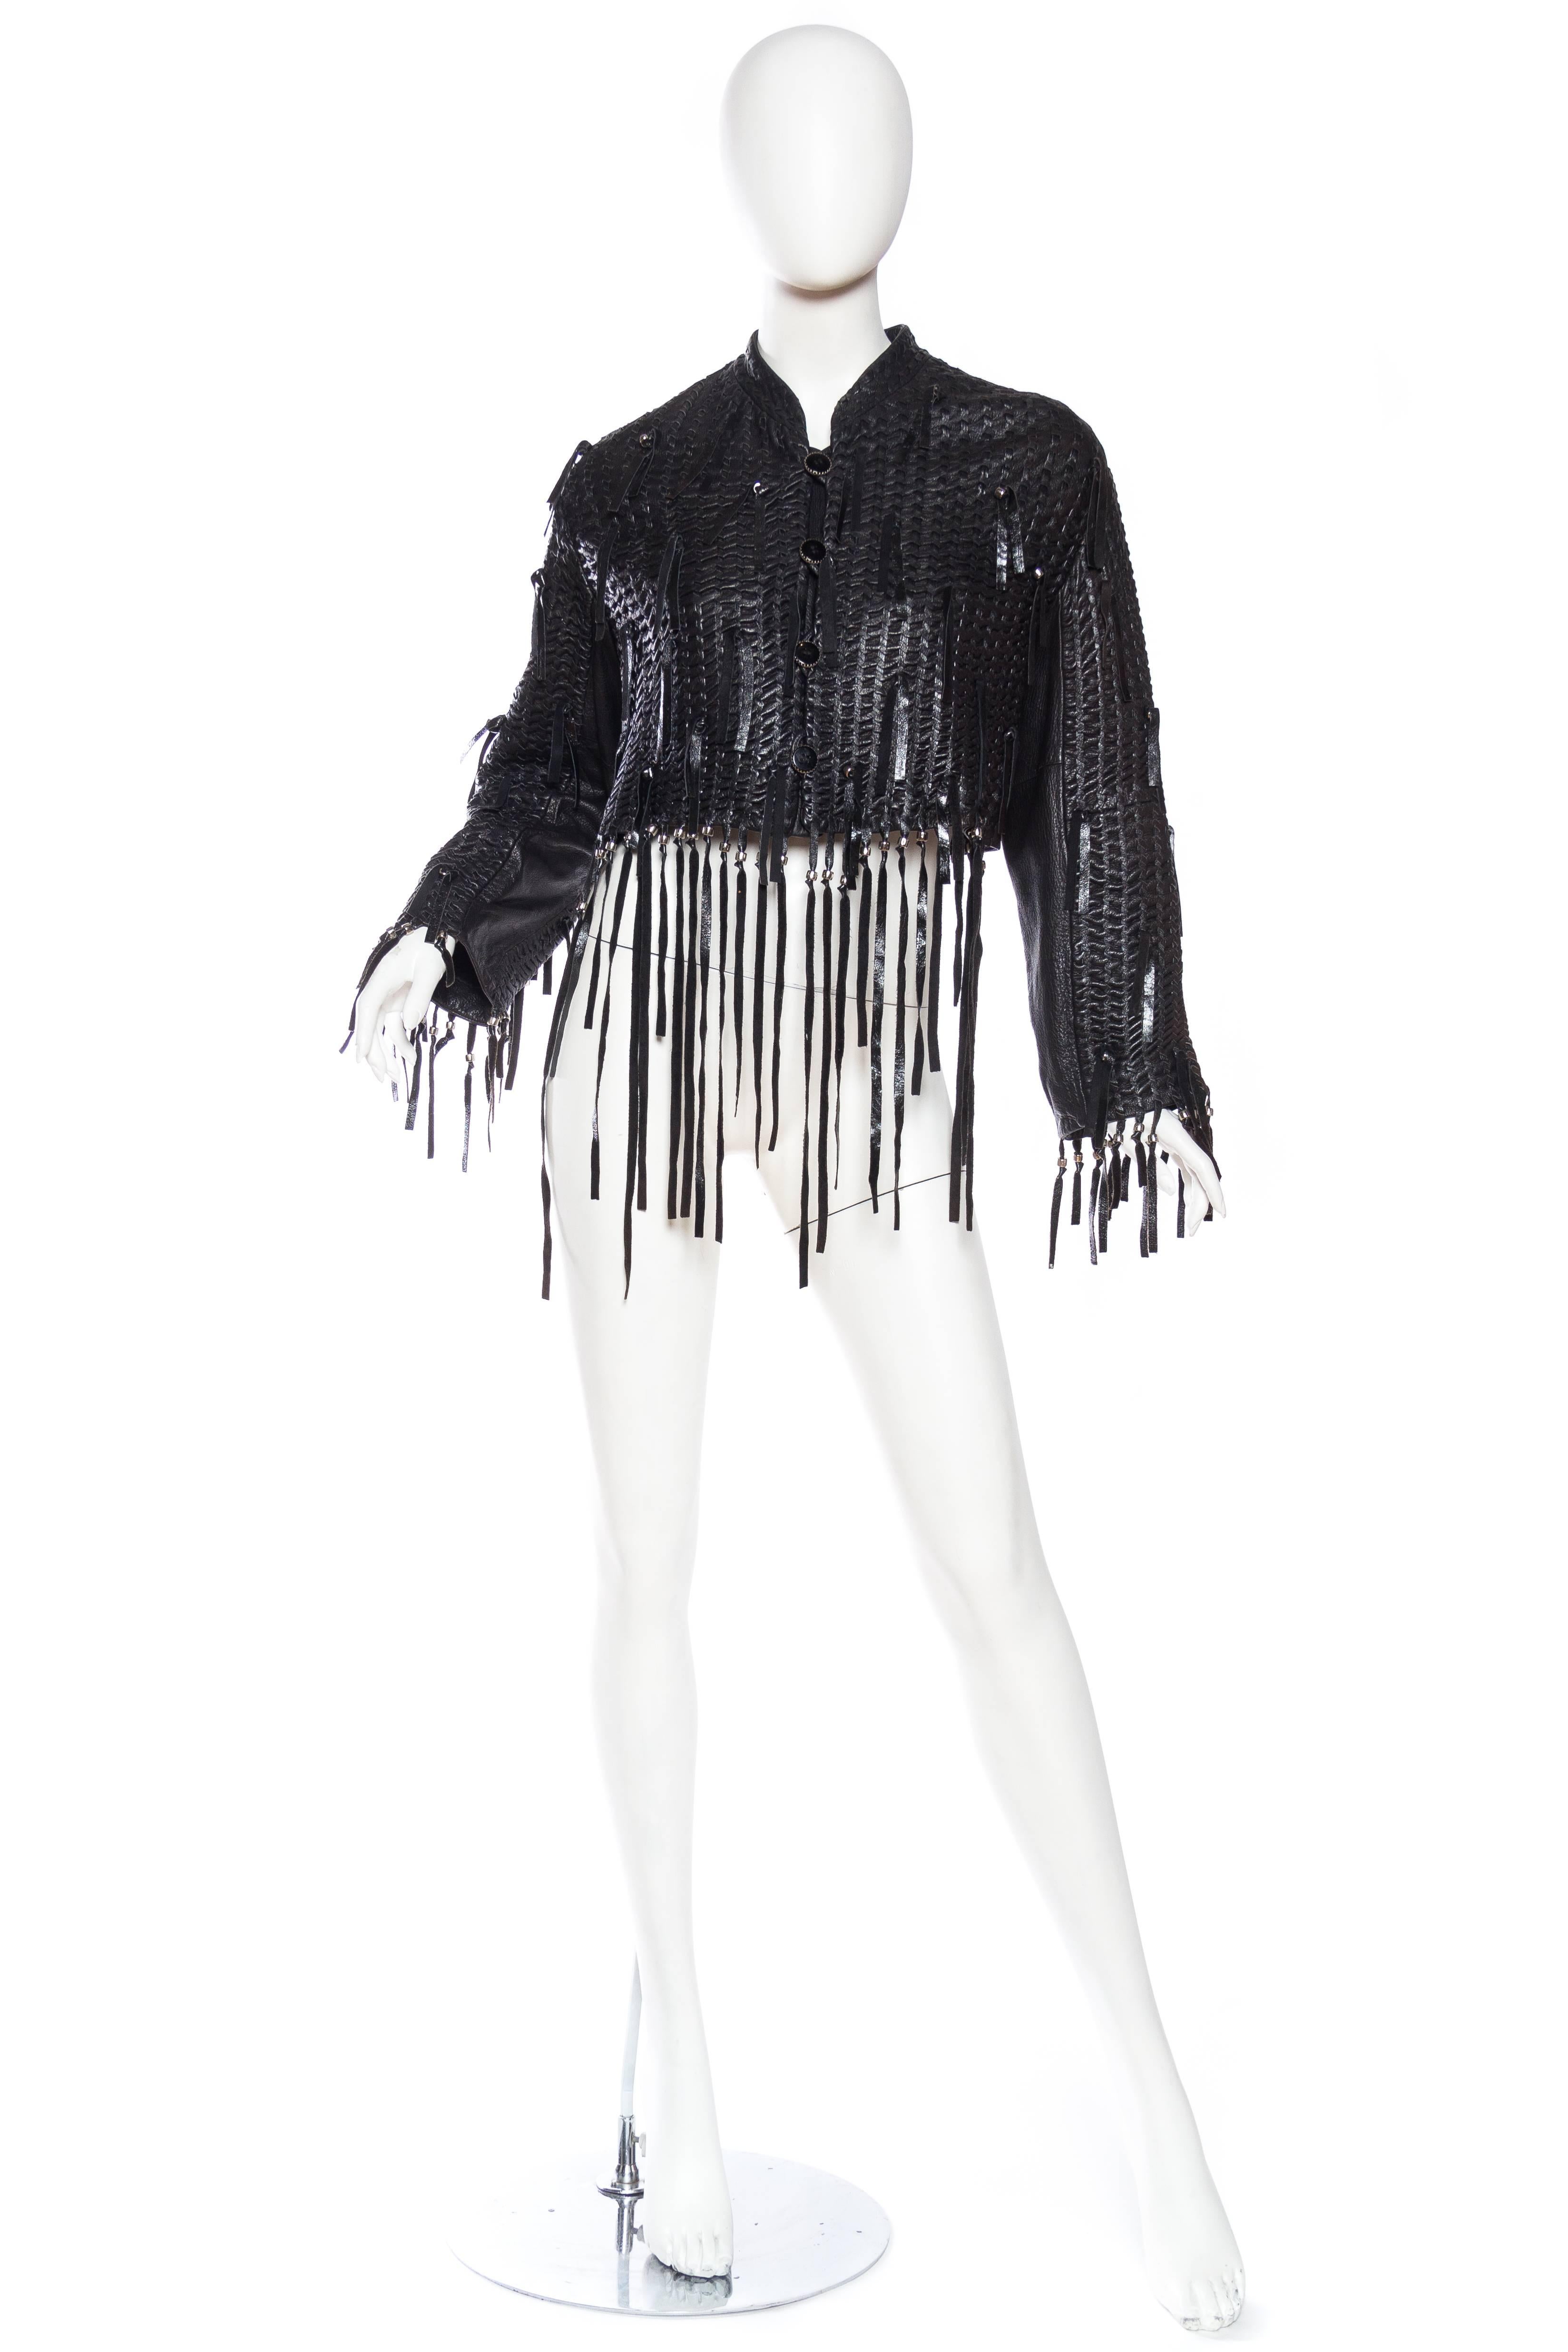 Issey Miyake Fringed Leather Jacket made from butter soft leather which has been entirely embroidered upon itself with leather, a beautiful work of art. 